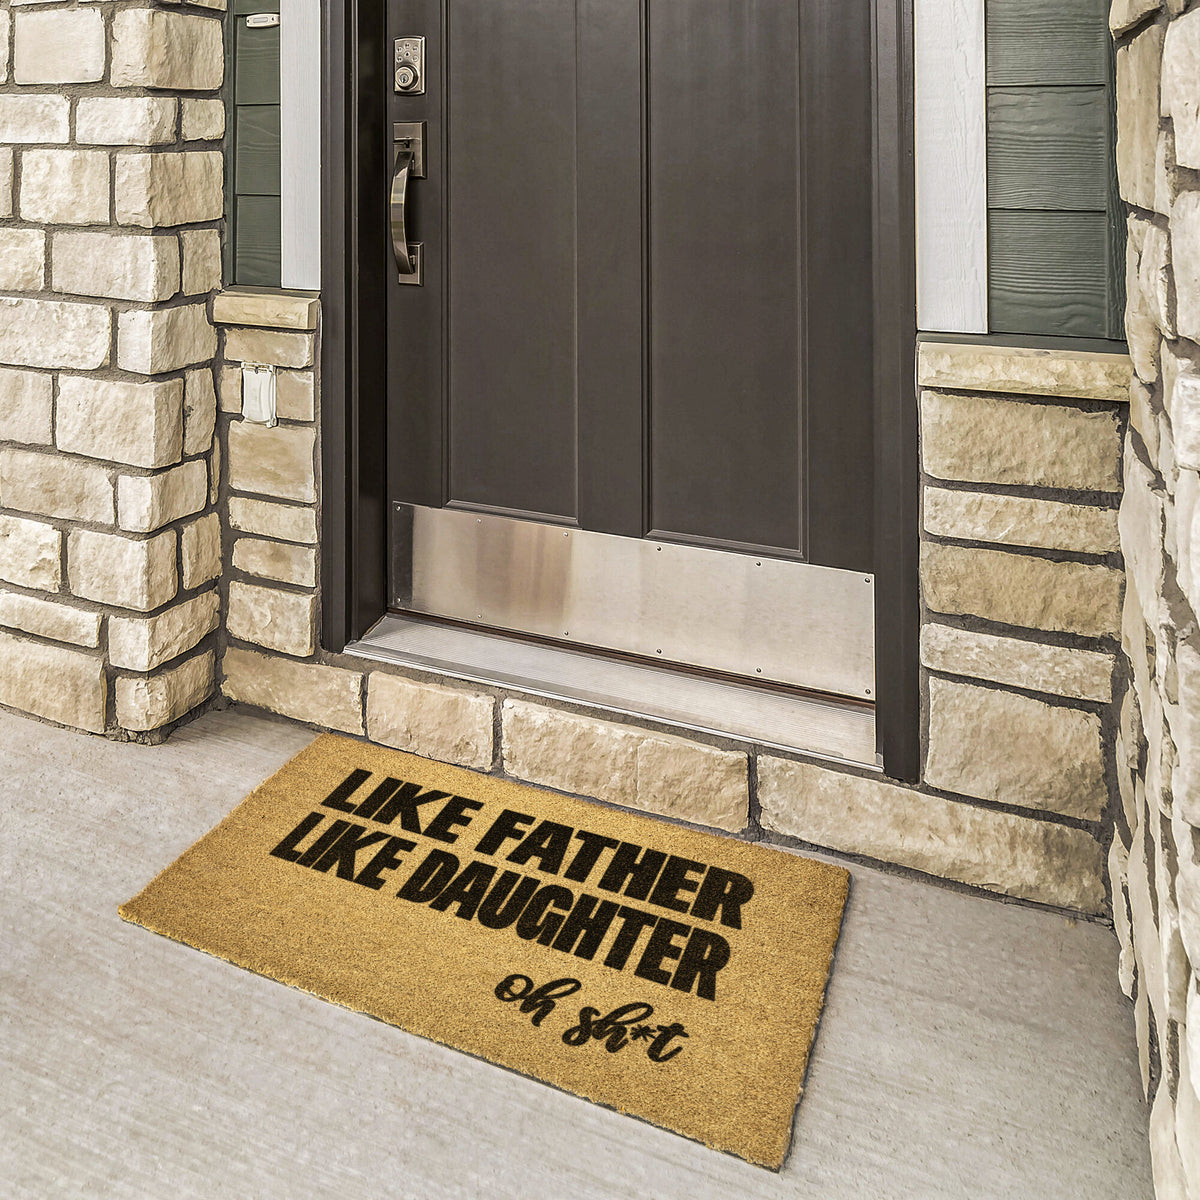 Like Father Like Daughter Doormat